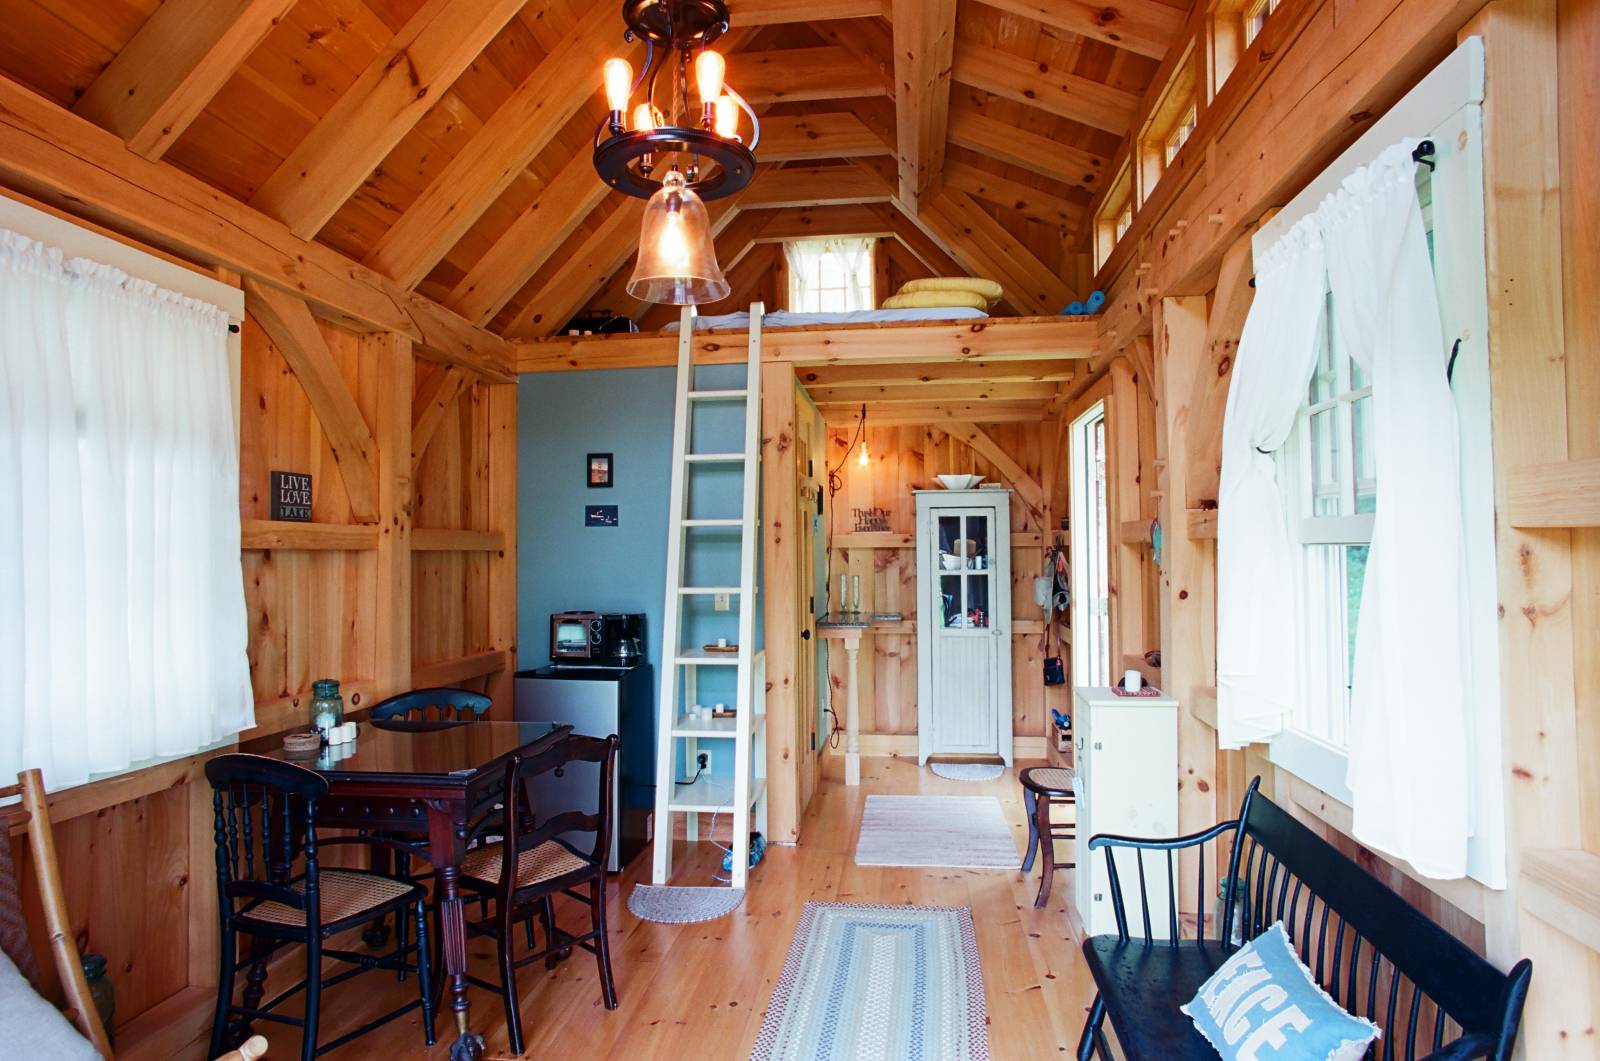 Cozy Quarters in the Tiny Timber Frame House